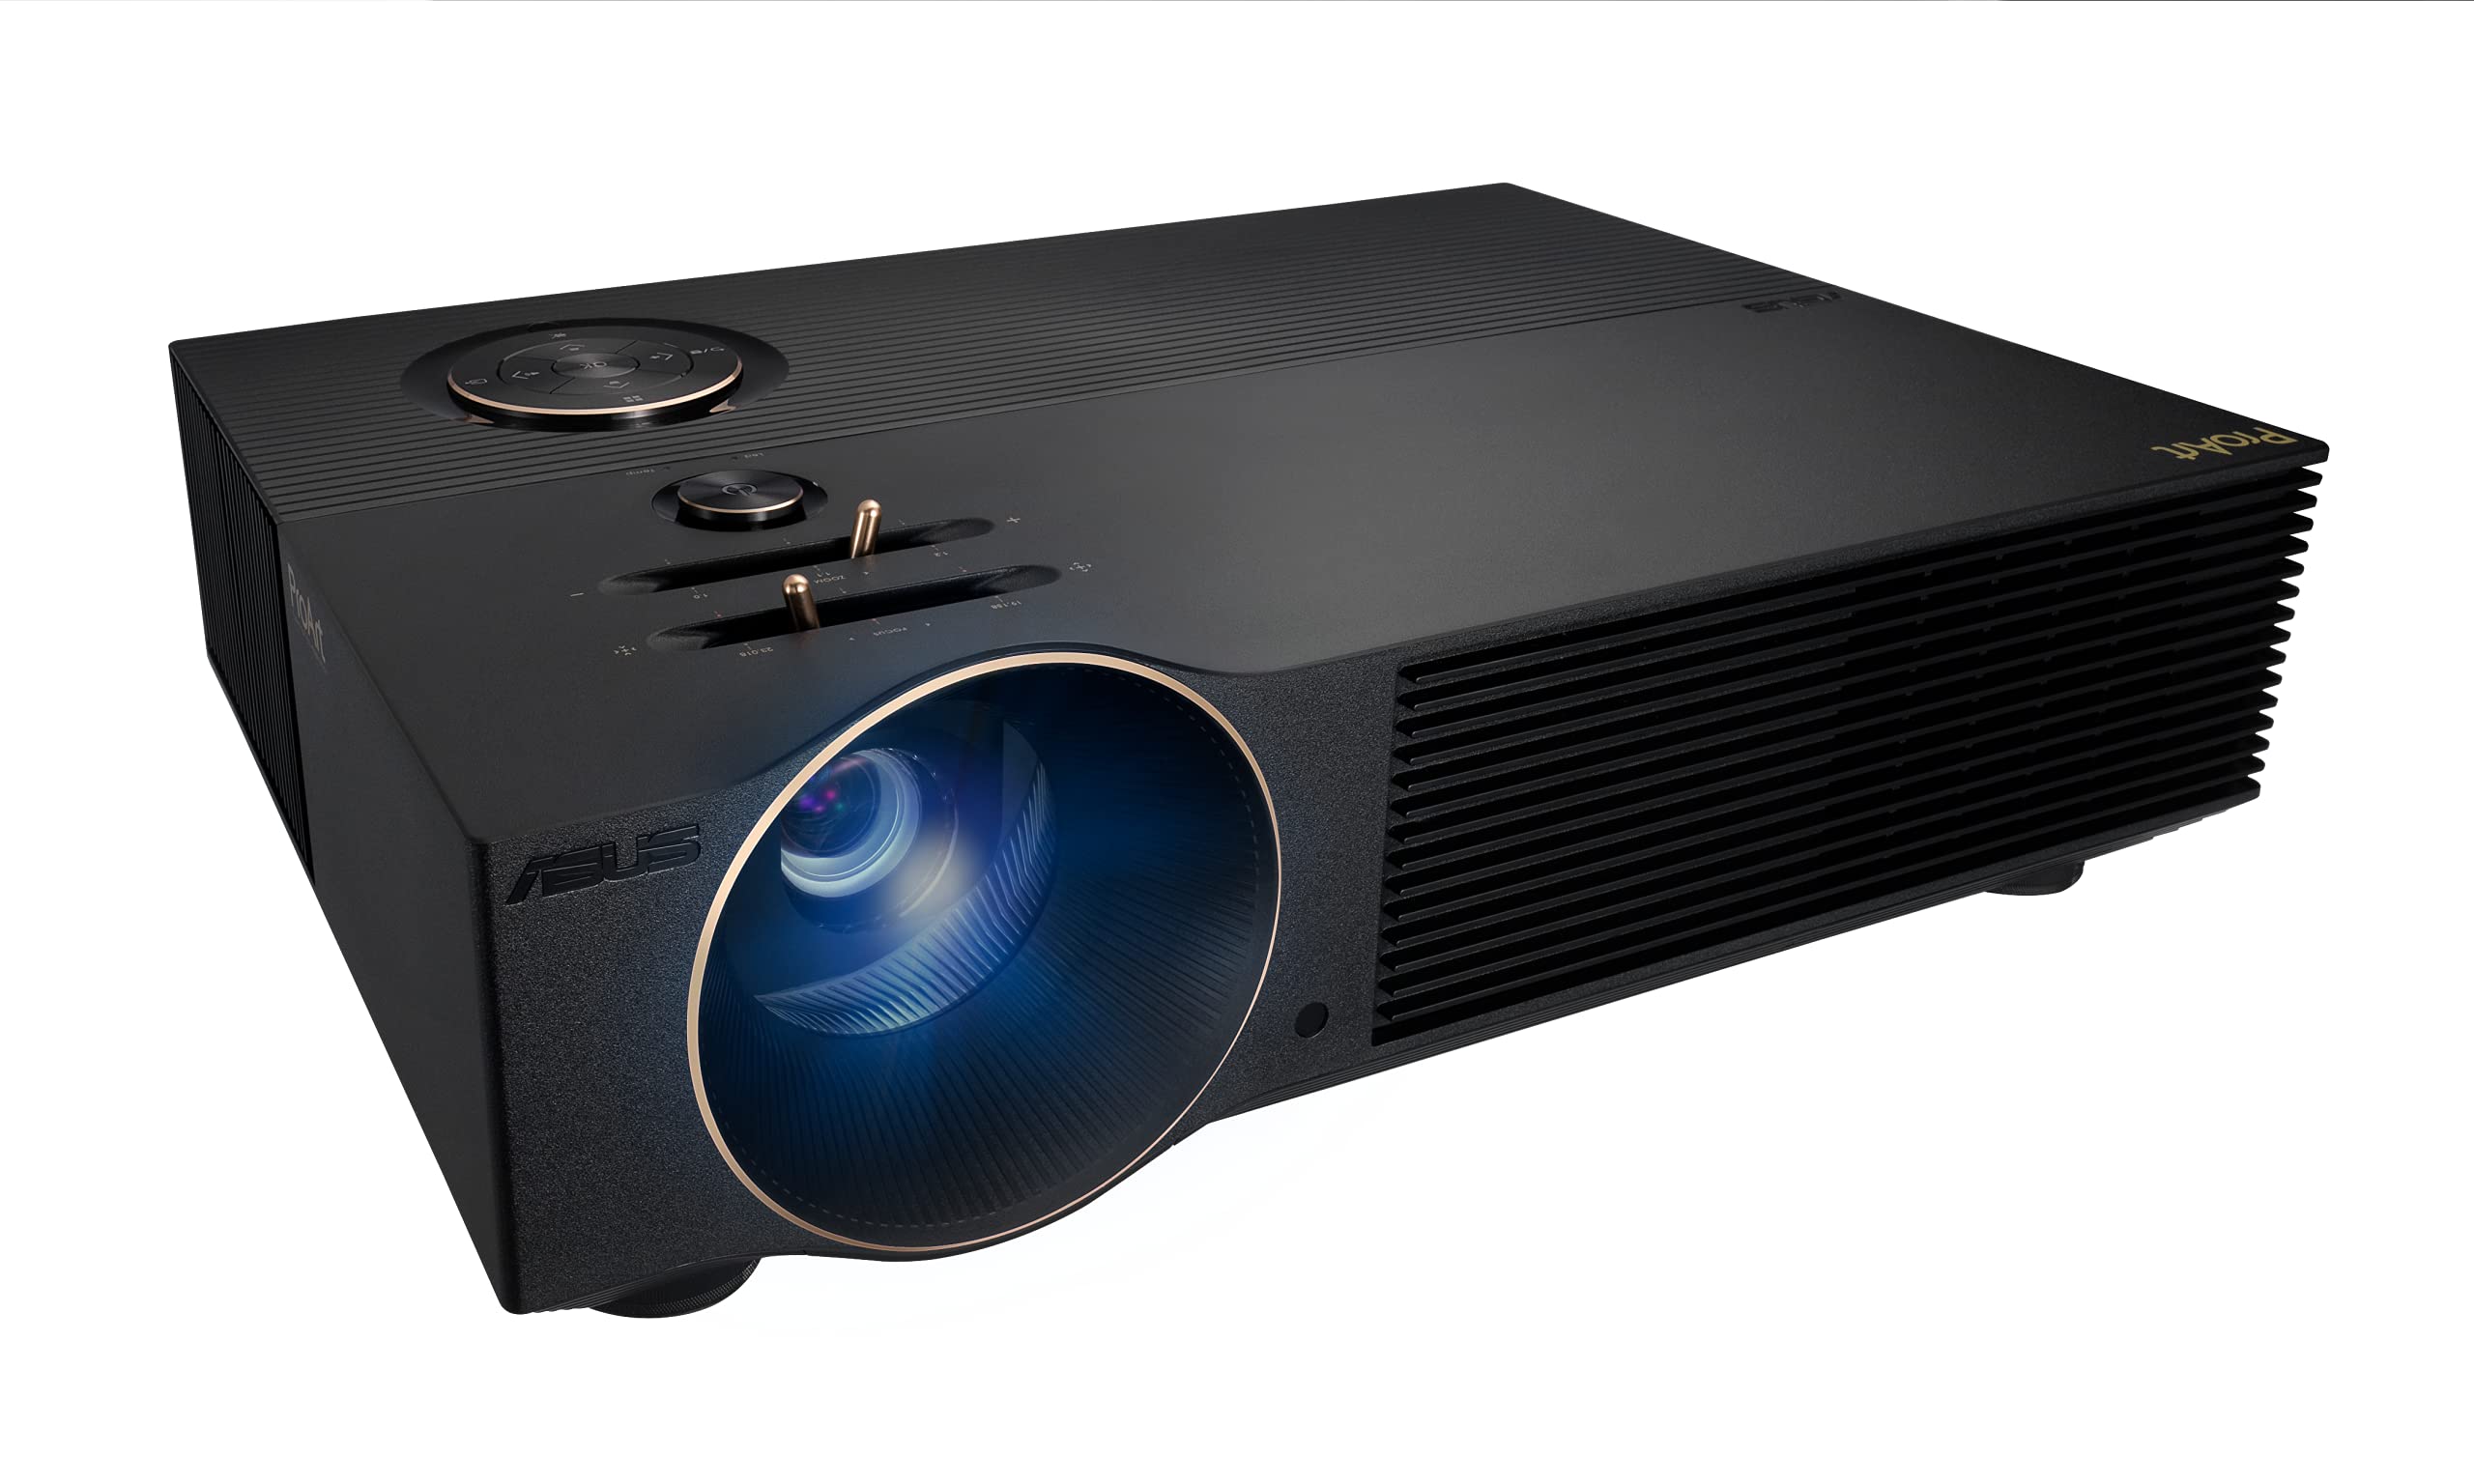 ASUS ProArt A1 LED Professional Projector - Full HD, 3000 Lumens, ∆E  2, 98% sRGB and Rec. 709, World’s First Calman Verified projector, 2D keystone correction, 1.2X zoom ratio, Wireless mirroring